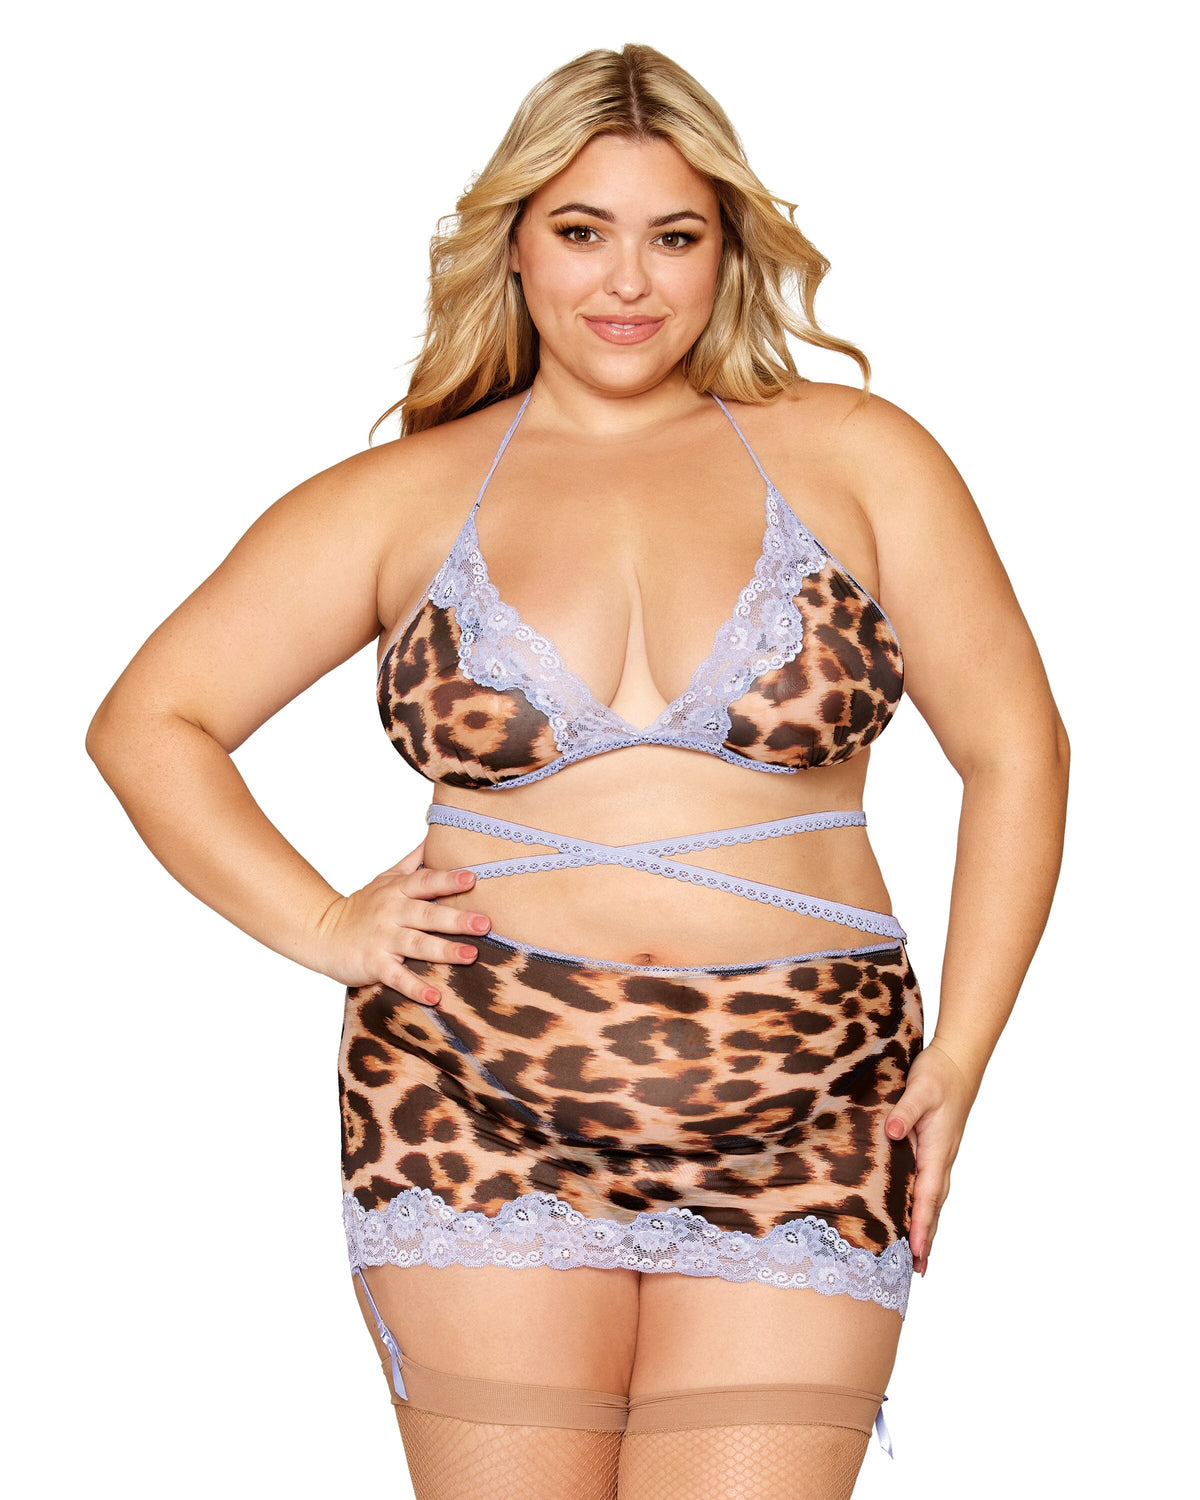 Dreamgirl Plus Size Leopard Printed Mesh with Contrast Scalloped Lace Bralette, Garter Skirt, and G-string Set Bralette set Dreamgirl 